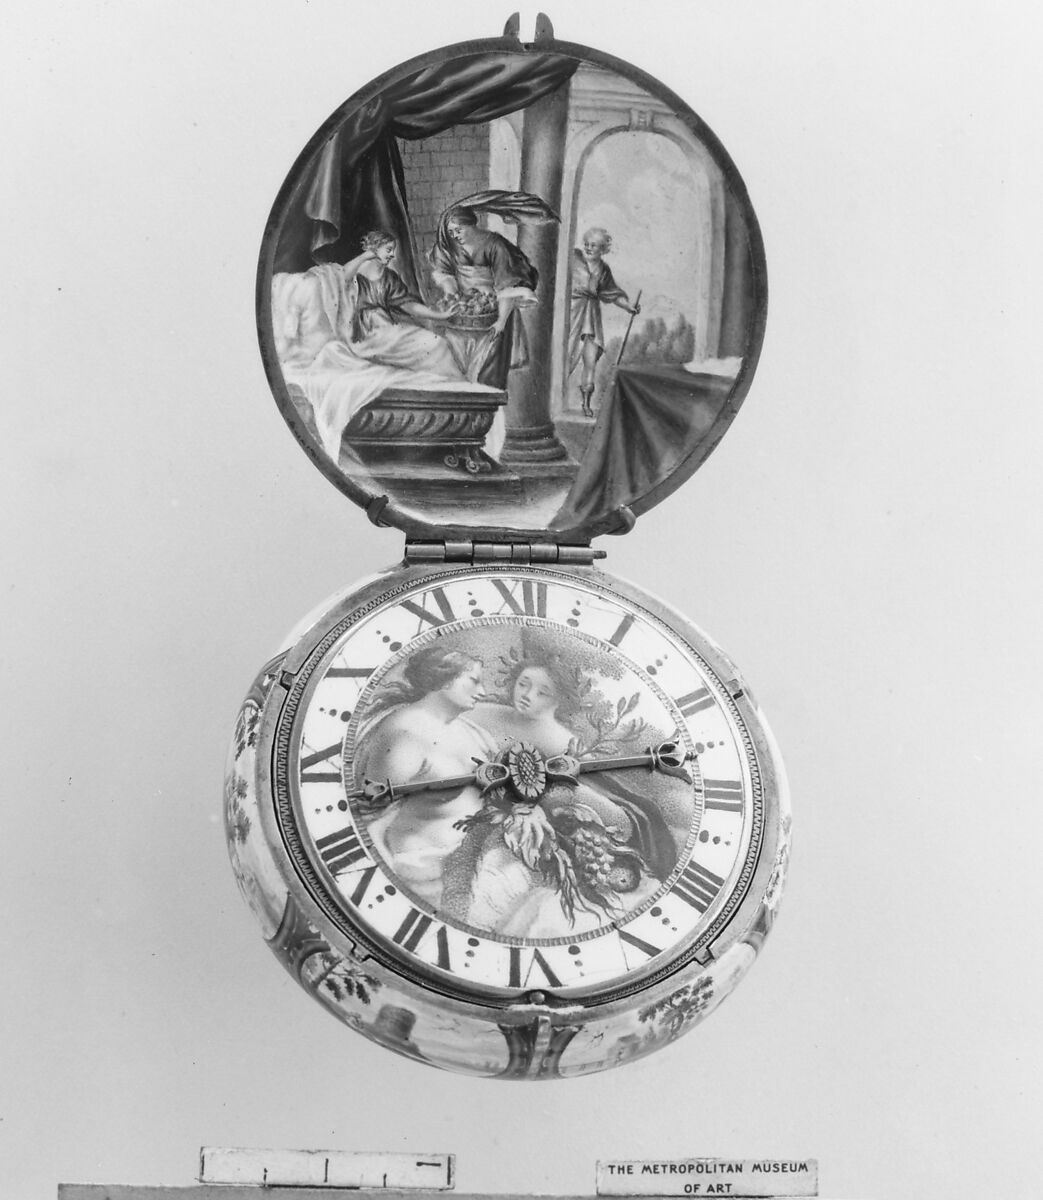 Watch, Watchmaker: Jacques Goullons (French, active Paris, 1626–died 1671), gold, enamel, French, Paris 